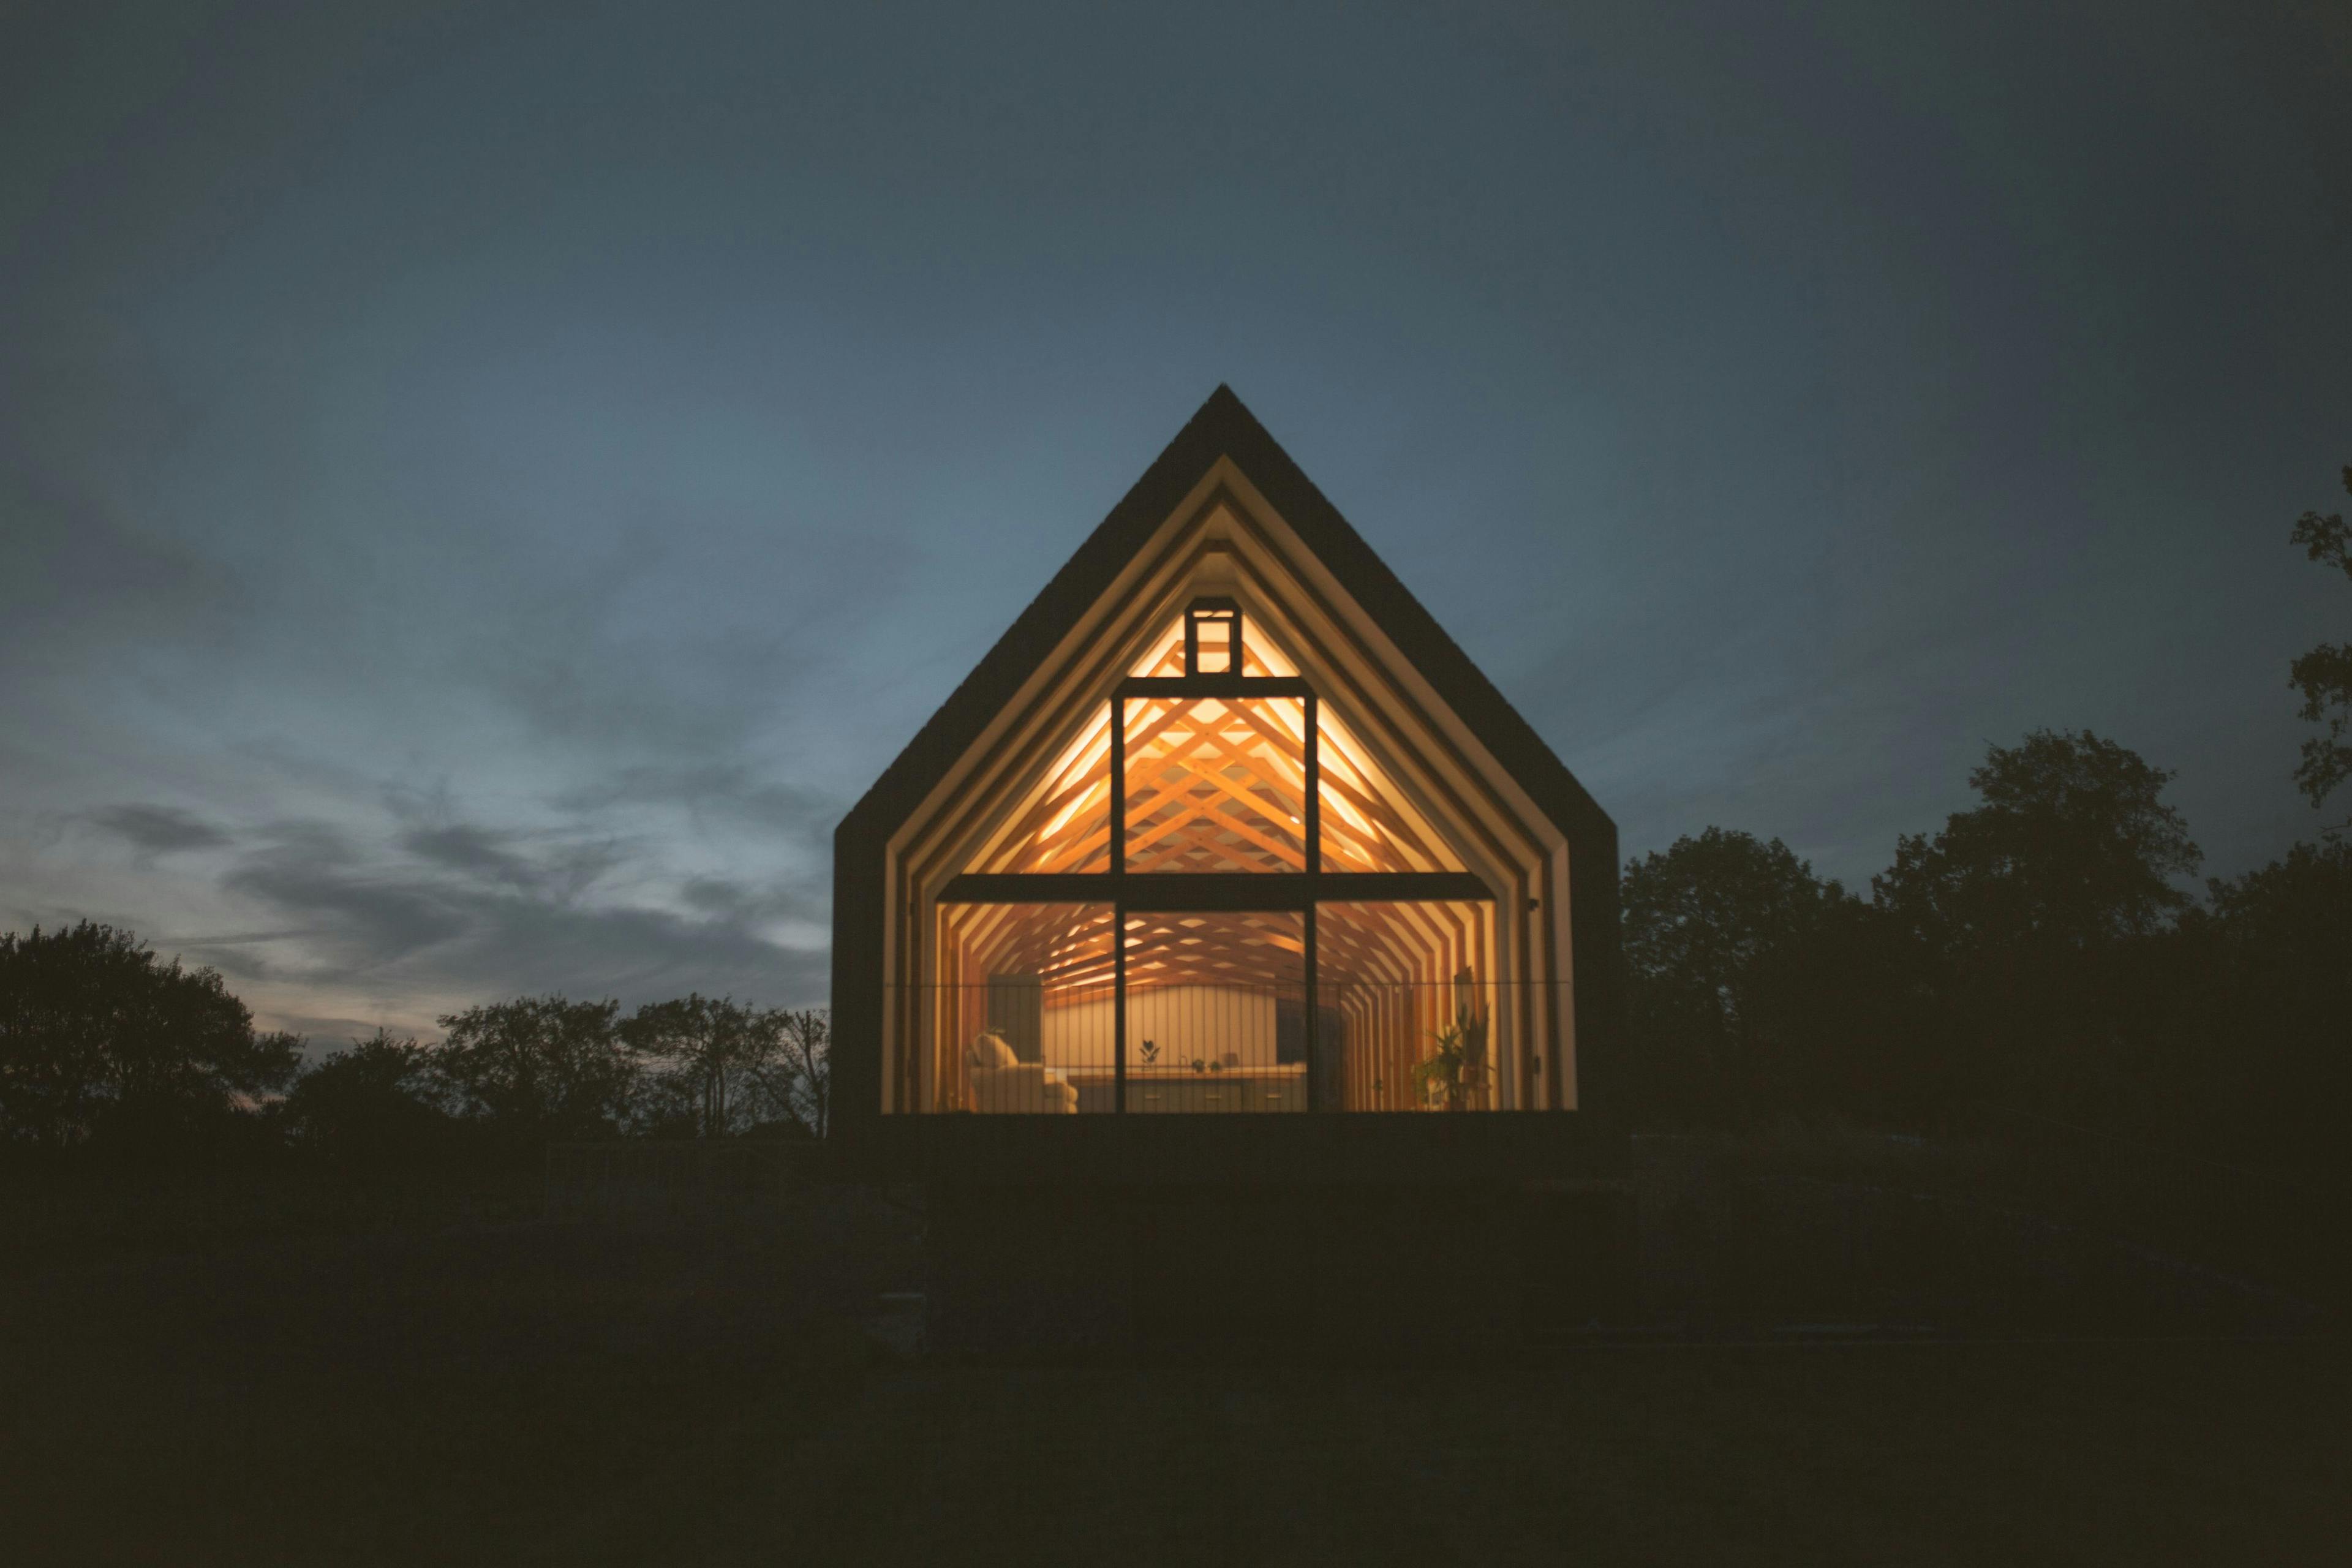 Isolated home in the countryside lit up at night